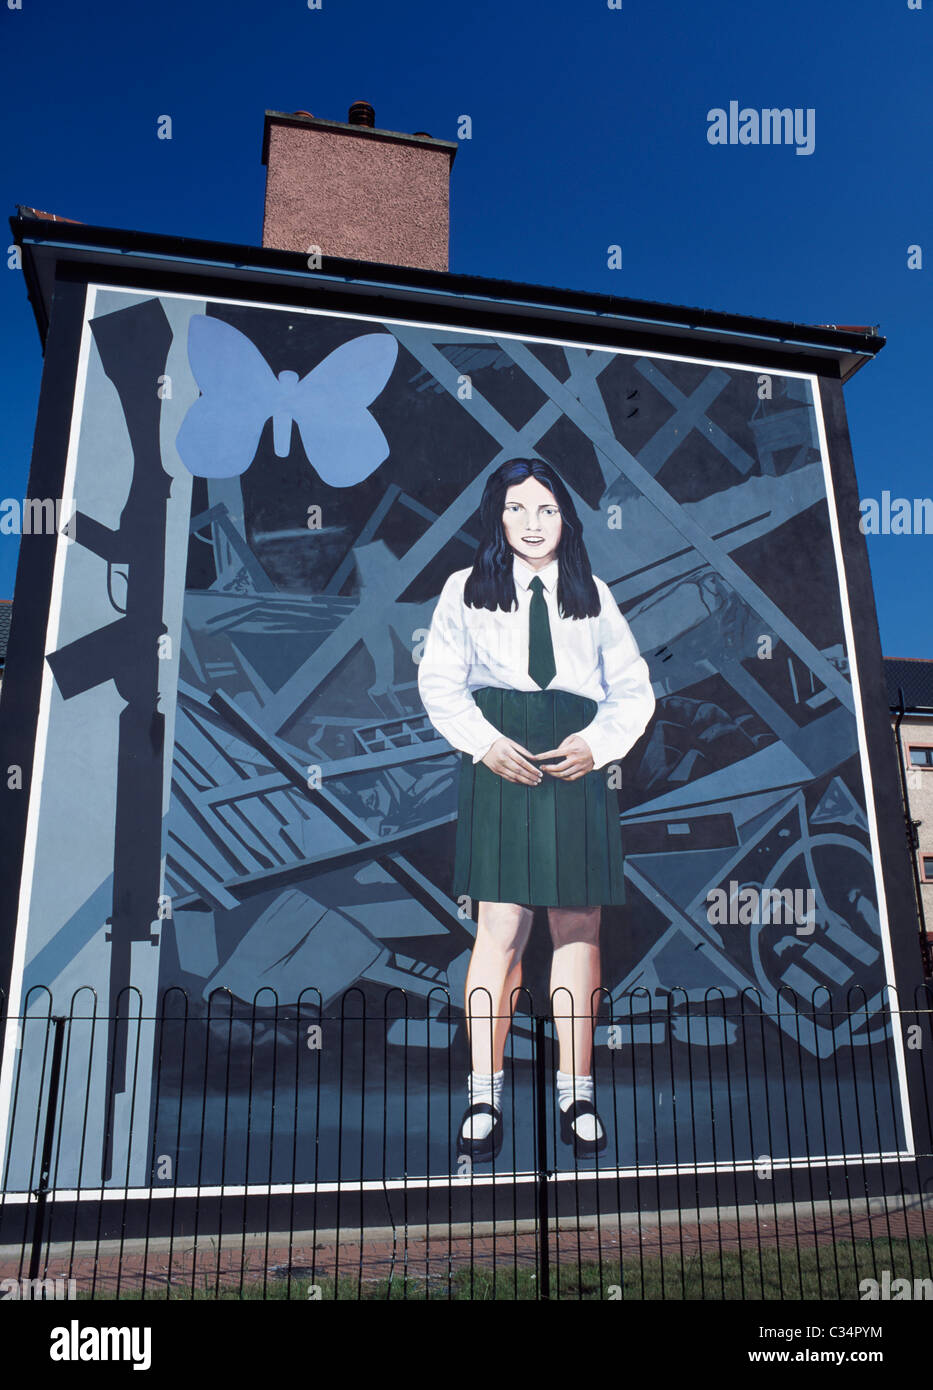 Bogside,Derry City,Co Derry,Northern Ireland;Mural Of A Young Girl Stock Photo